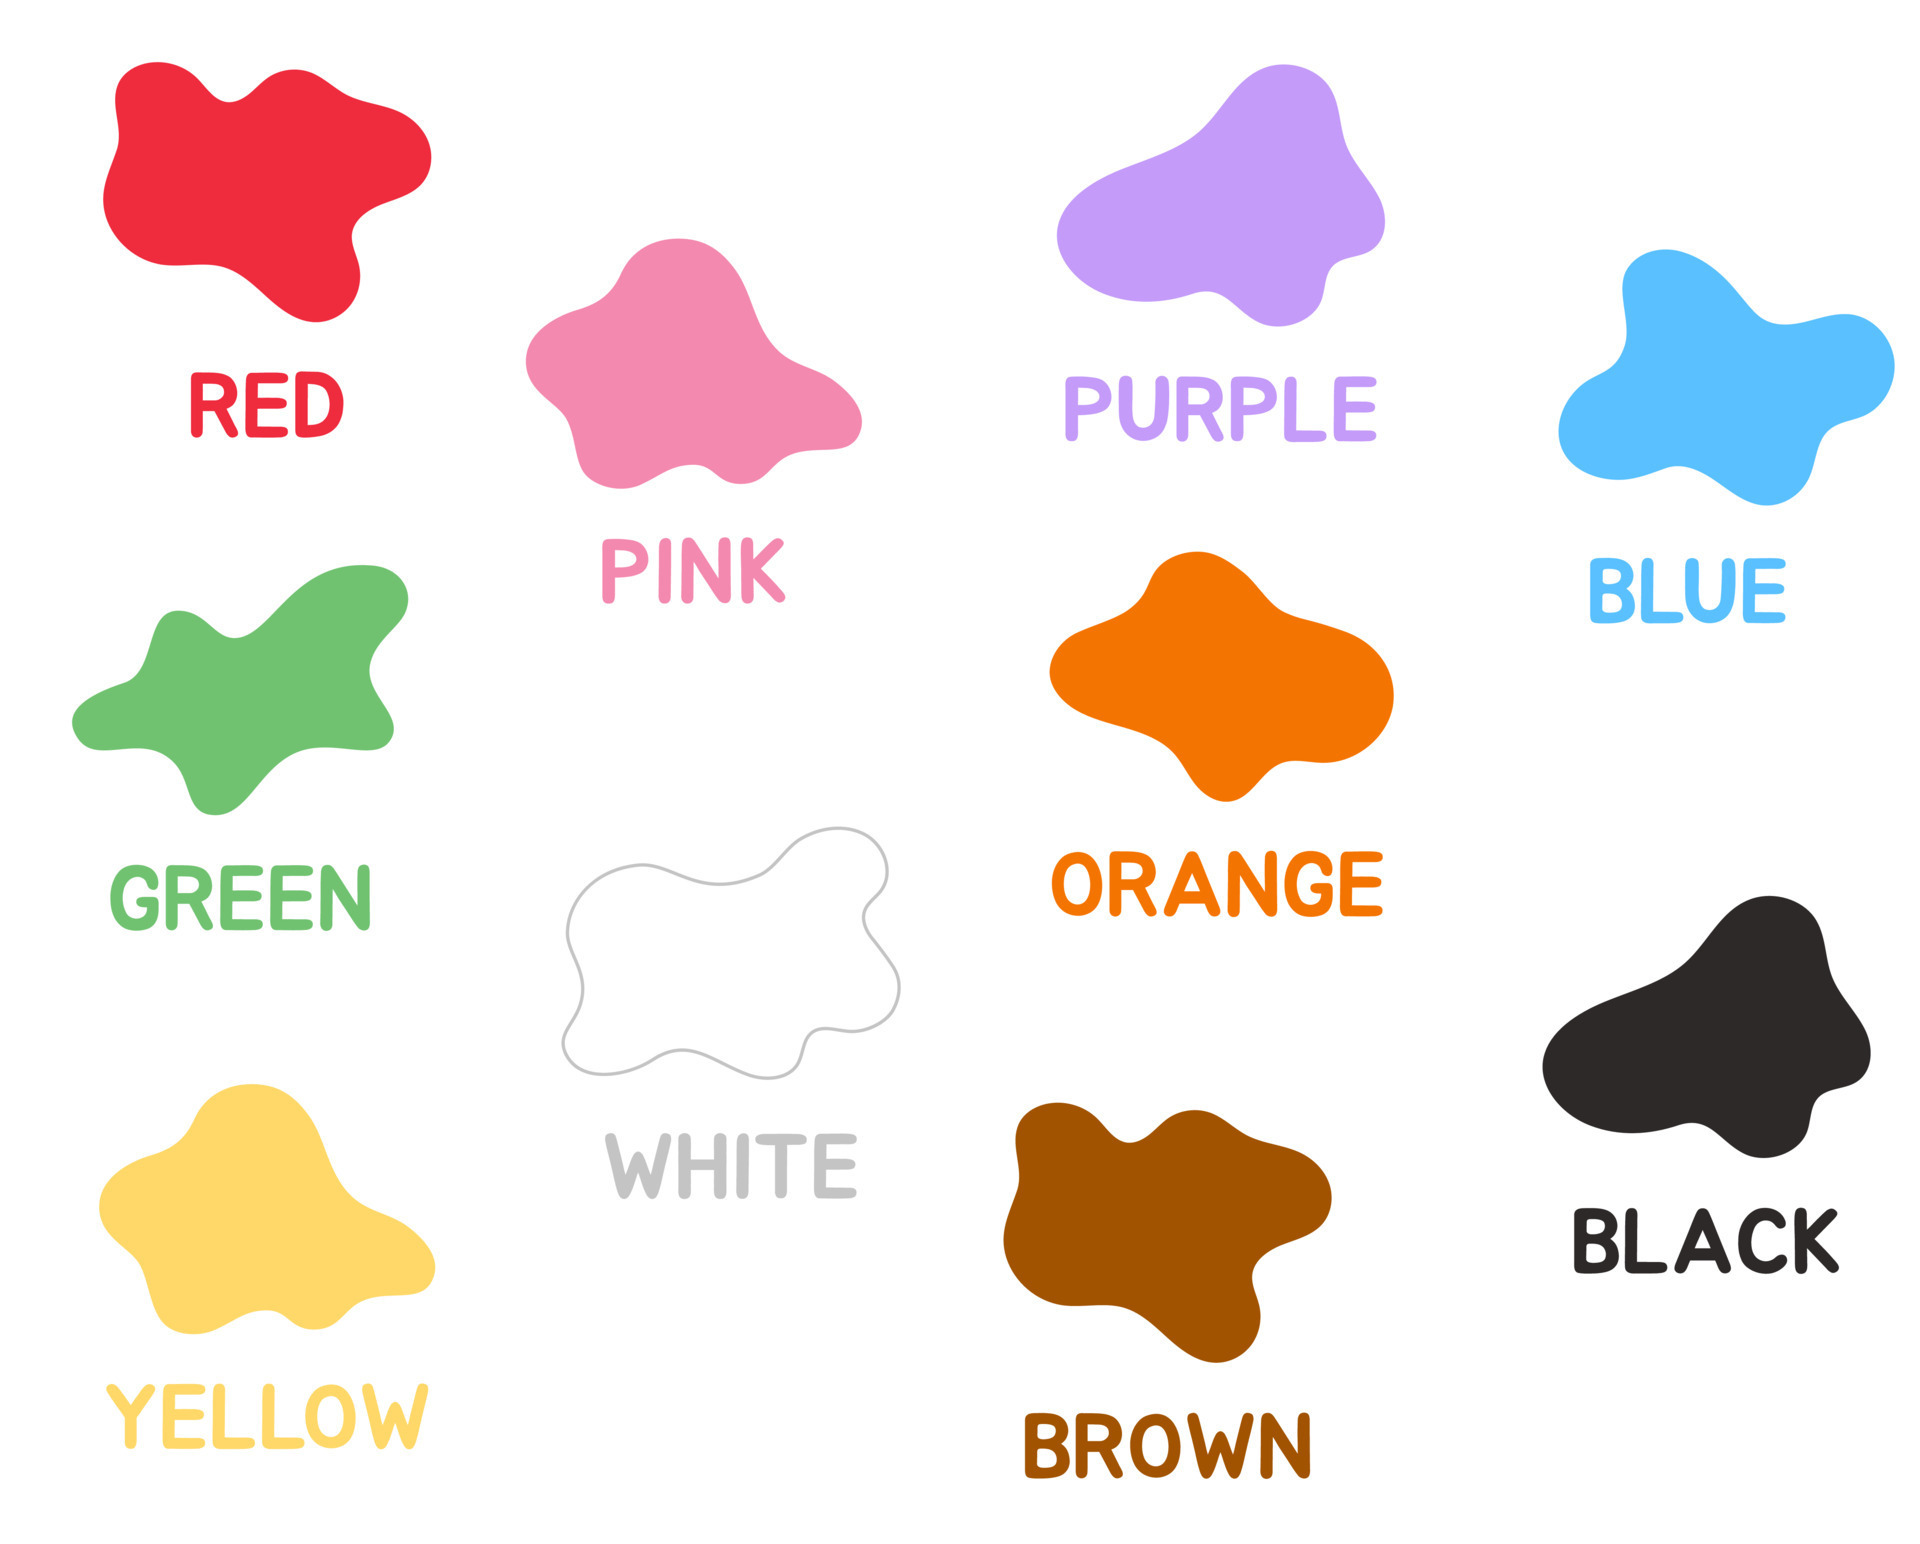 https://static.vecteezy.com/system/resources/previews/021/635/665/original/learning-basic-colors-for-preschool-kindergarten-kids-with-their-names-set-of-colored-spots-on-the-white-background-educational-set-for-children-and-toddlers-vector.jpg